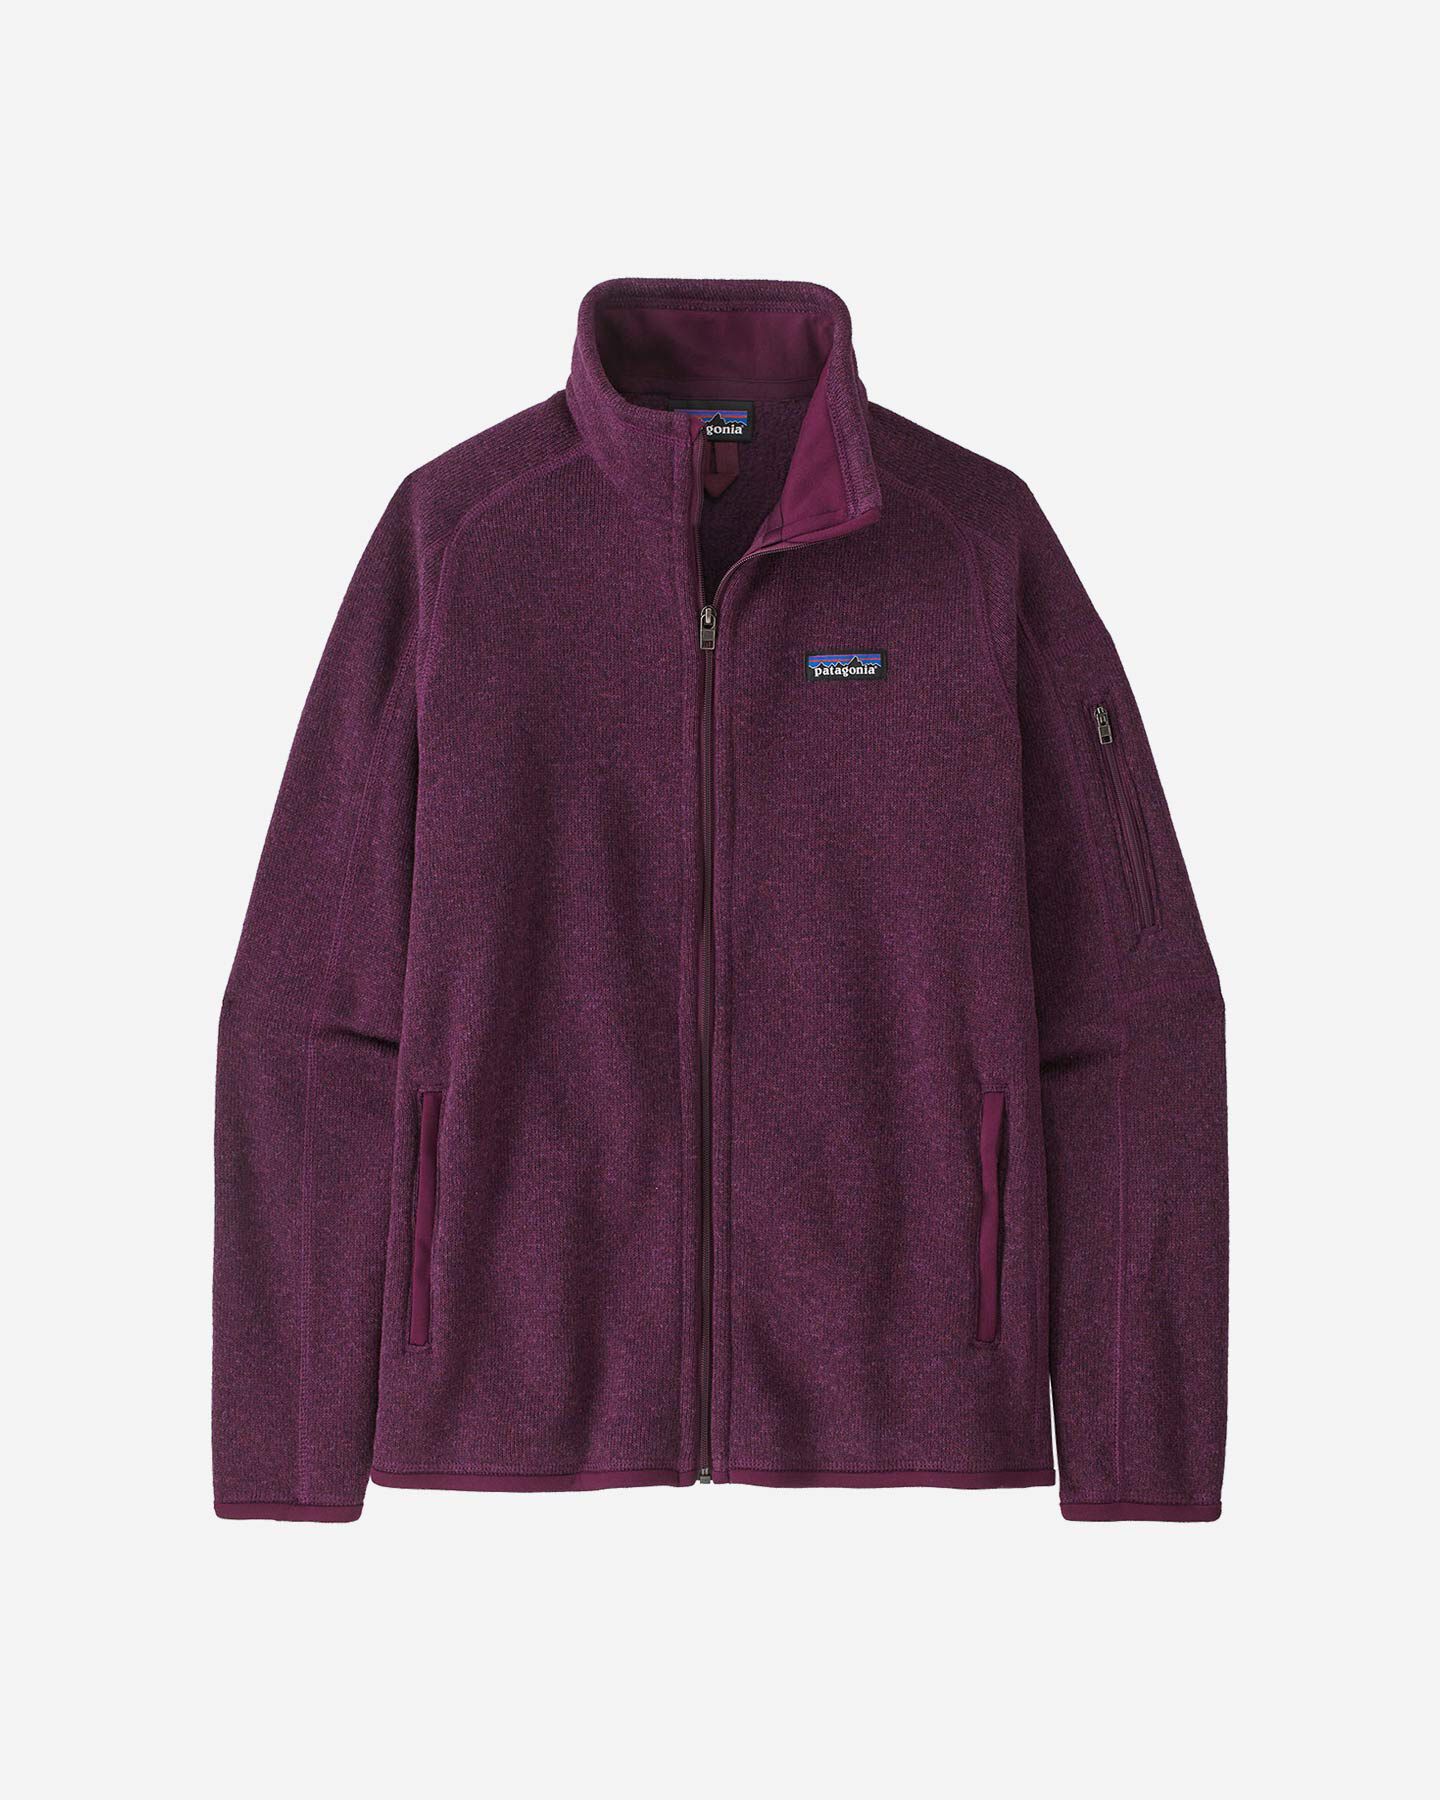  Pile PATAGONIA BETTER SWEATER FLEECE FZ W S5628782|NTPL|XS scatto 0